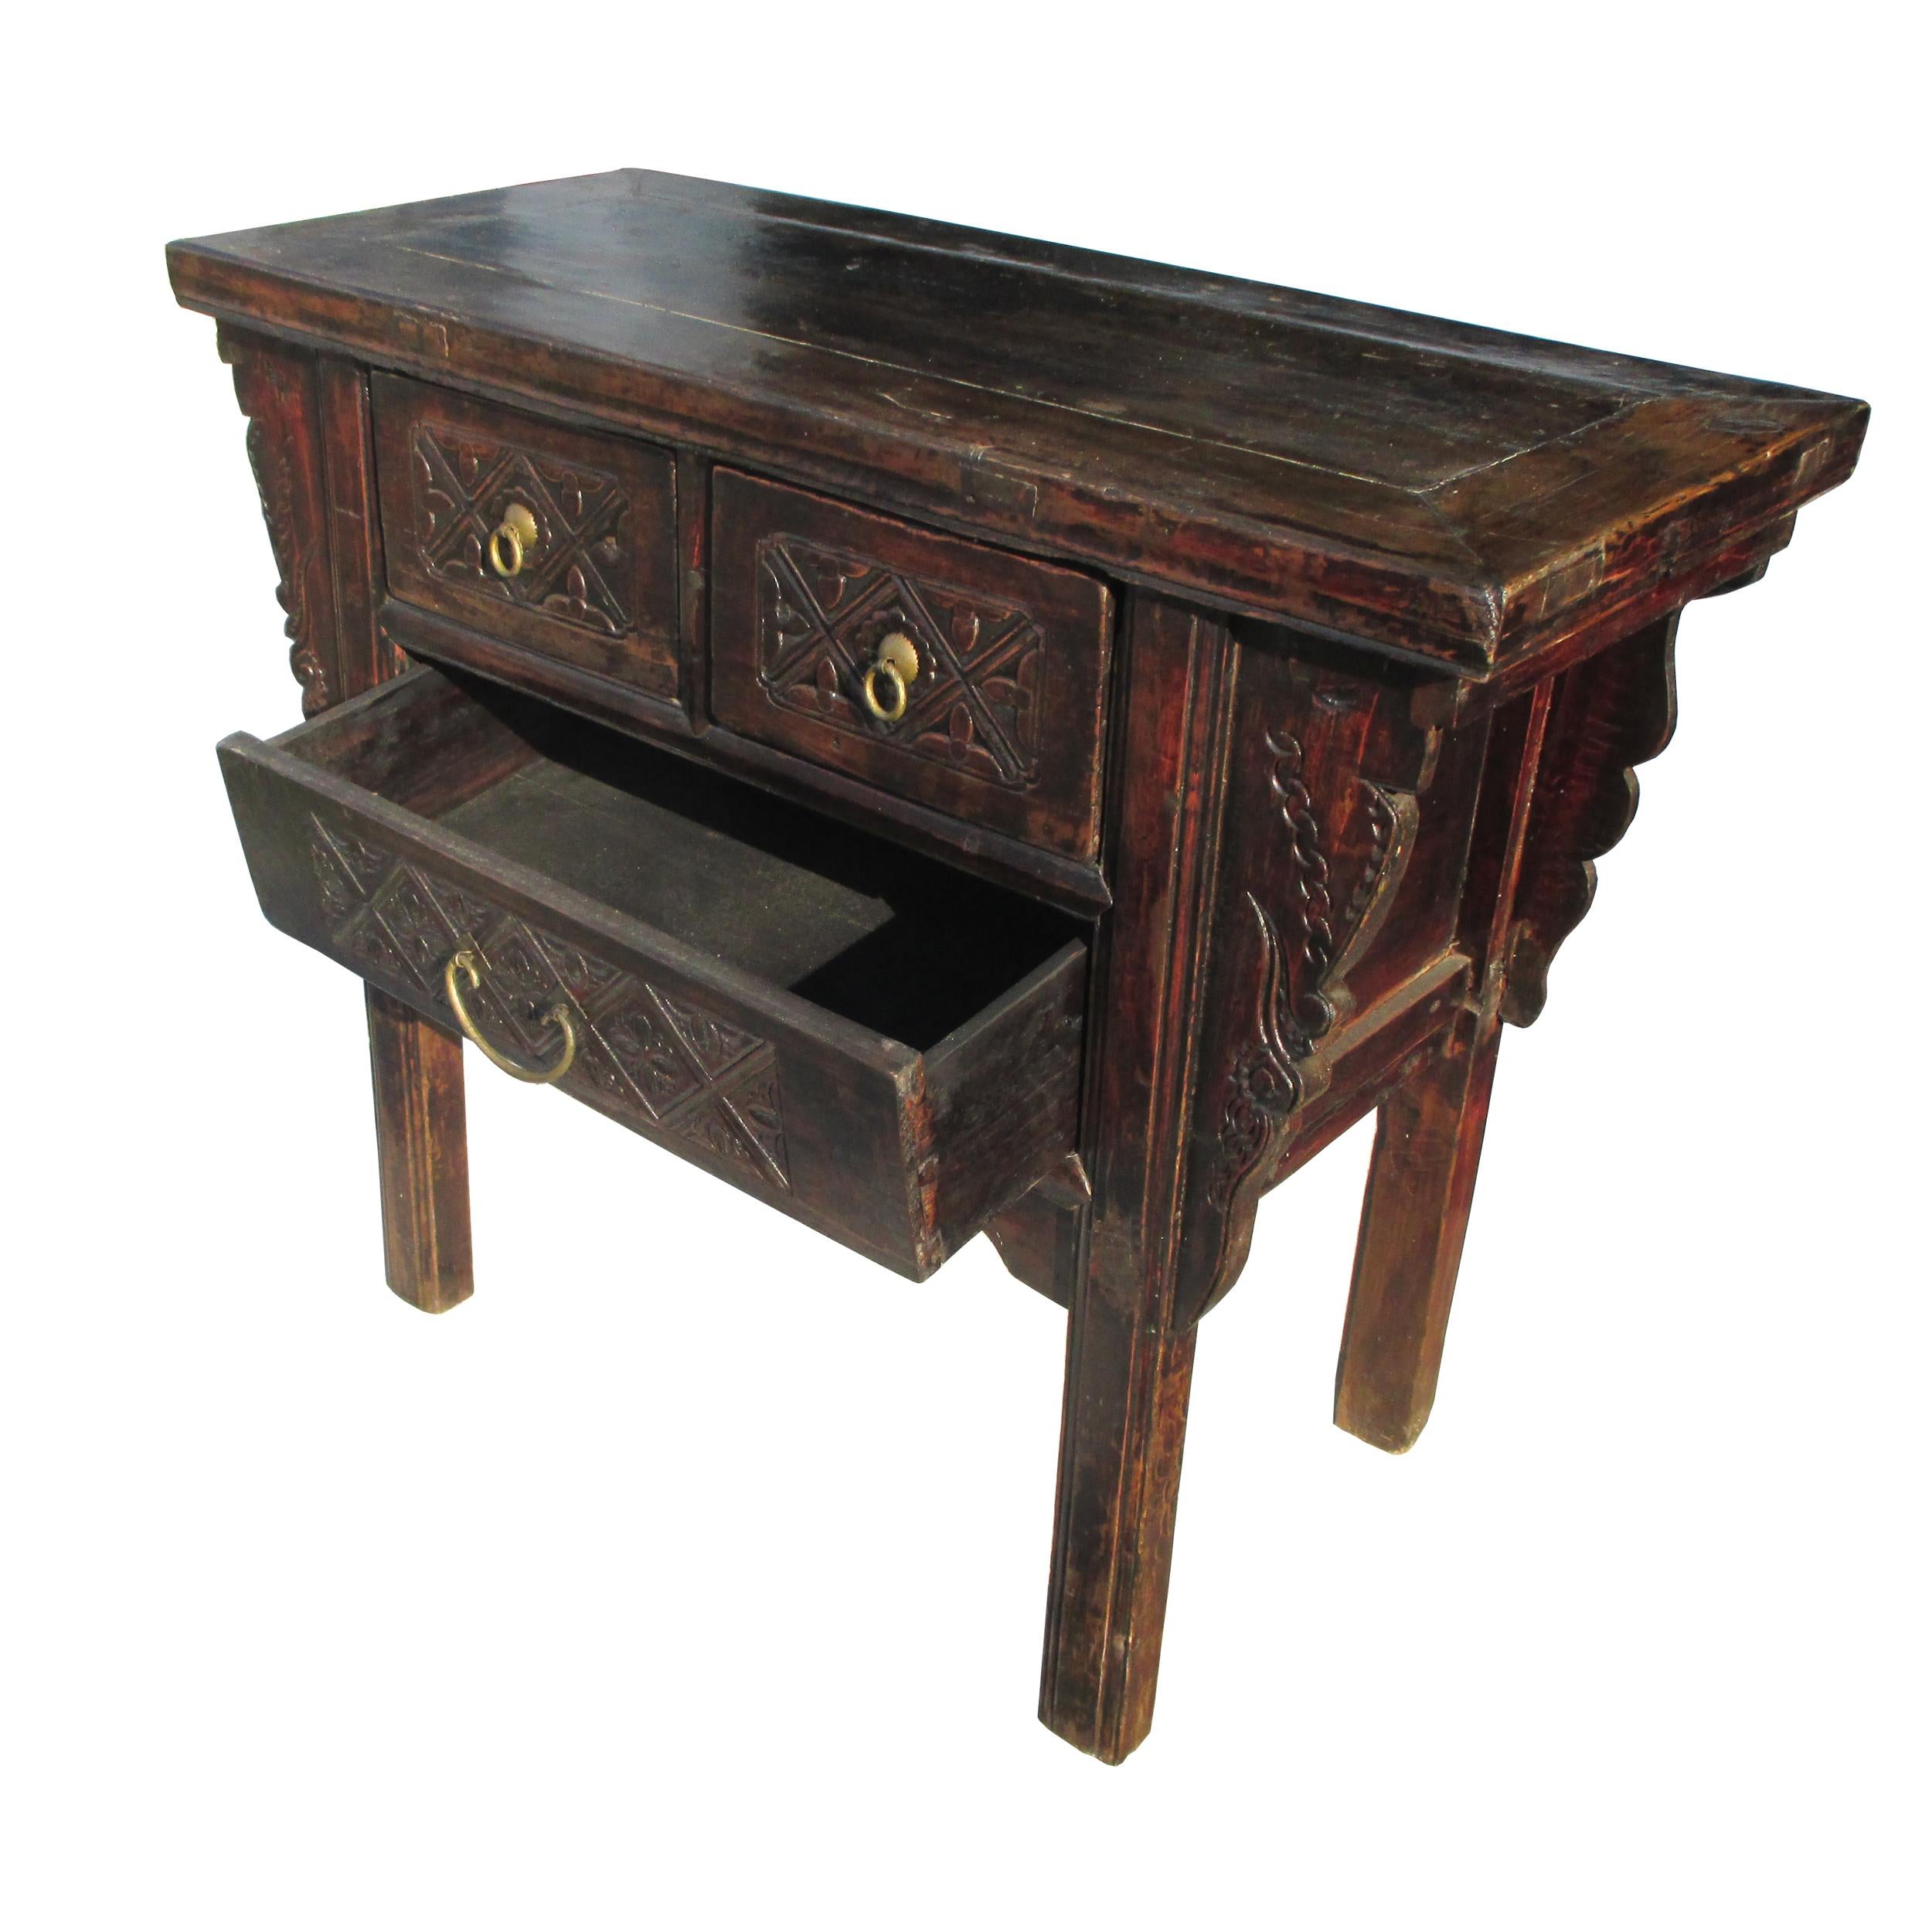 19th century Qing Dynasty alter console table

Beautifully aged patina with 3 drawers and original brass pulls. 
Cabinet is accented with scrolled motifs. Straight legs with carved apron. 
    